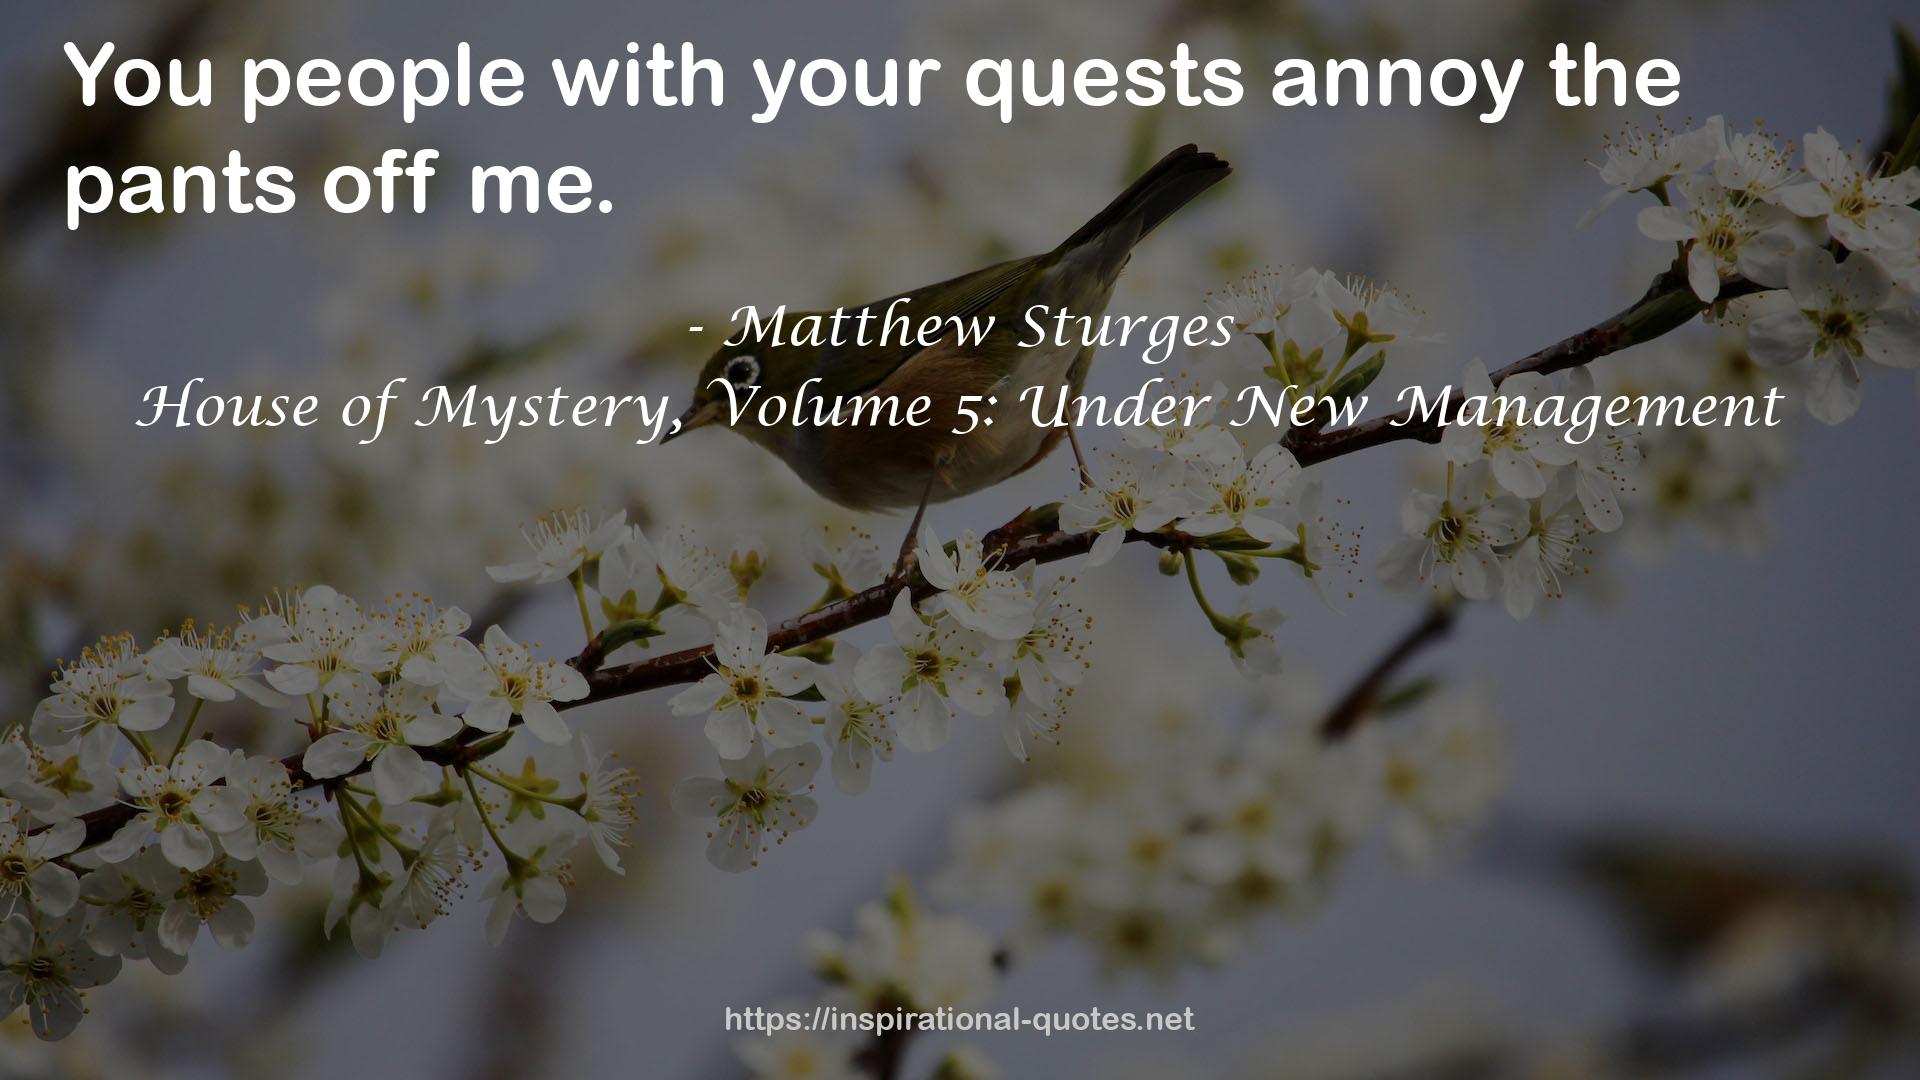 House of Mystery, Volume 5: Under New Management QUOTES